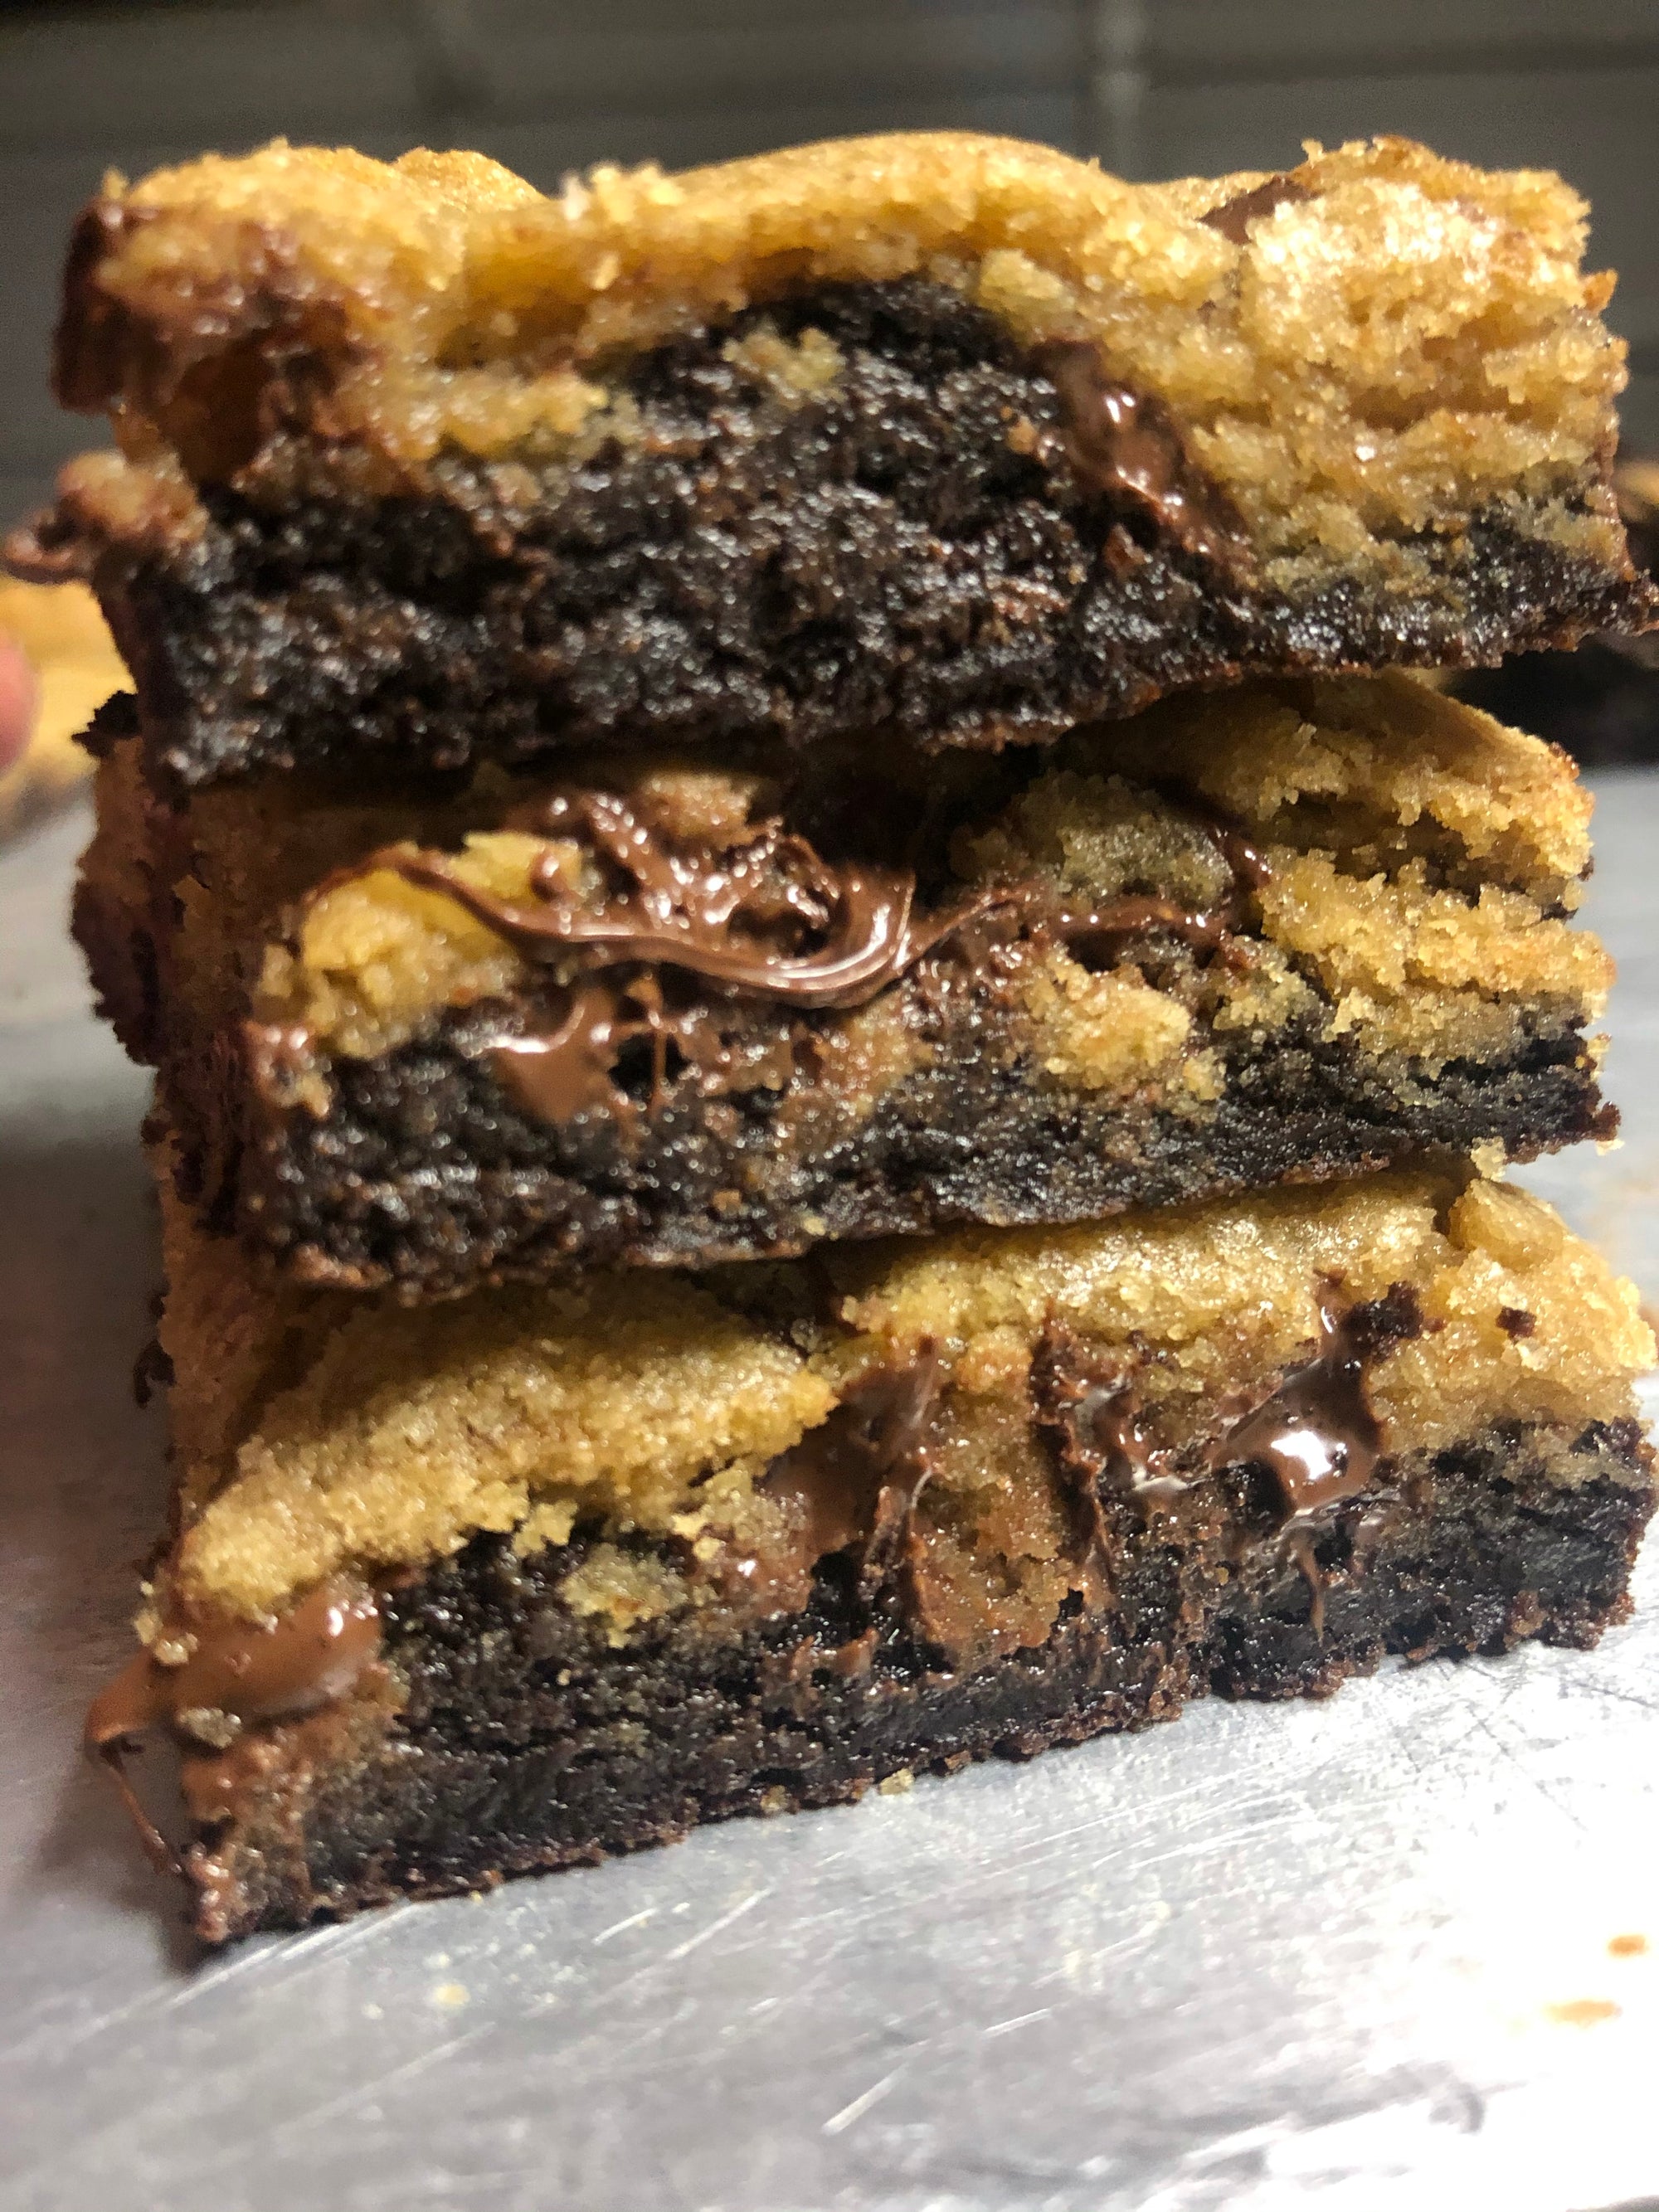 BROWN BUTTER DBL CHOCO BARS